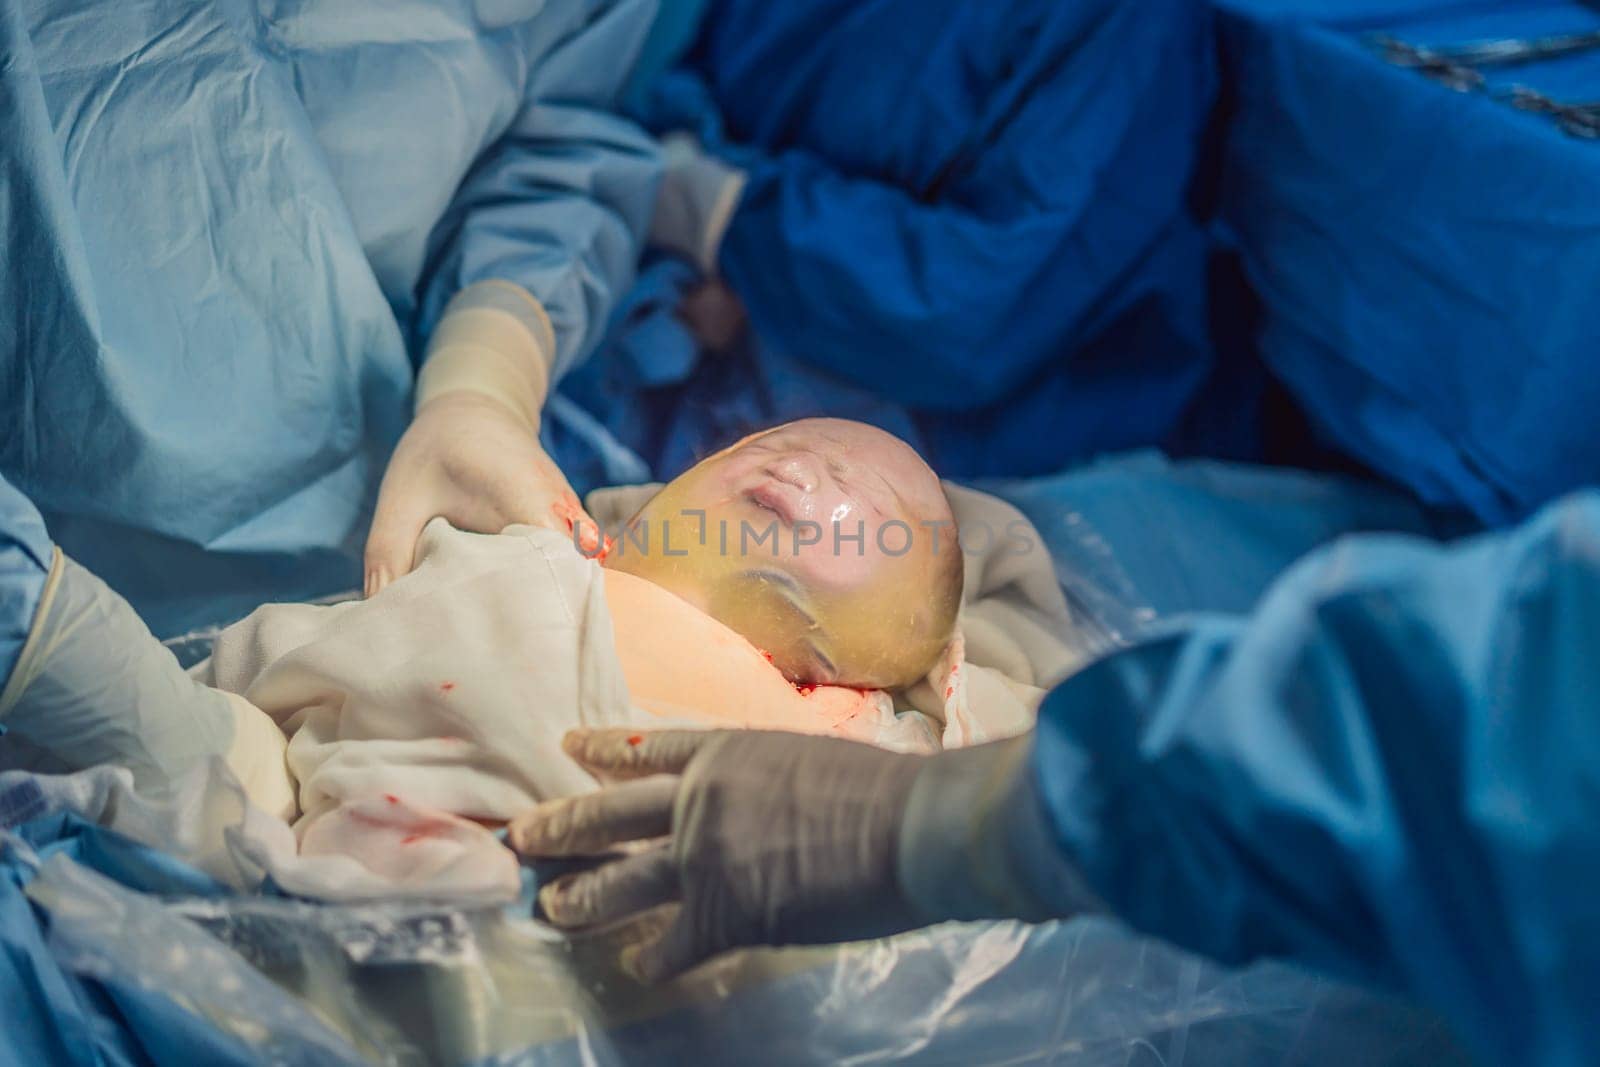 A baby is delivered in an intact amniotic sac during a caesarean section. The medical team carefully performs the procedure, highlighting the precision and care involved in this unique birth scenario by galitskaya